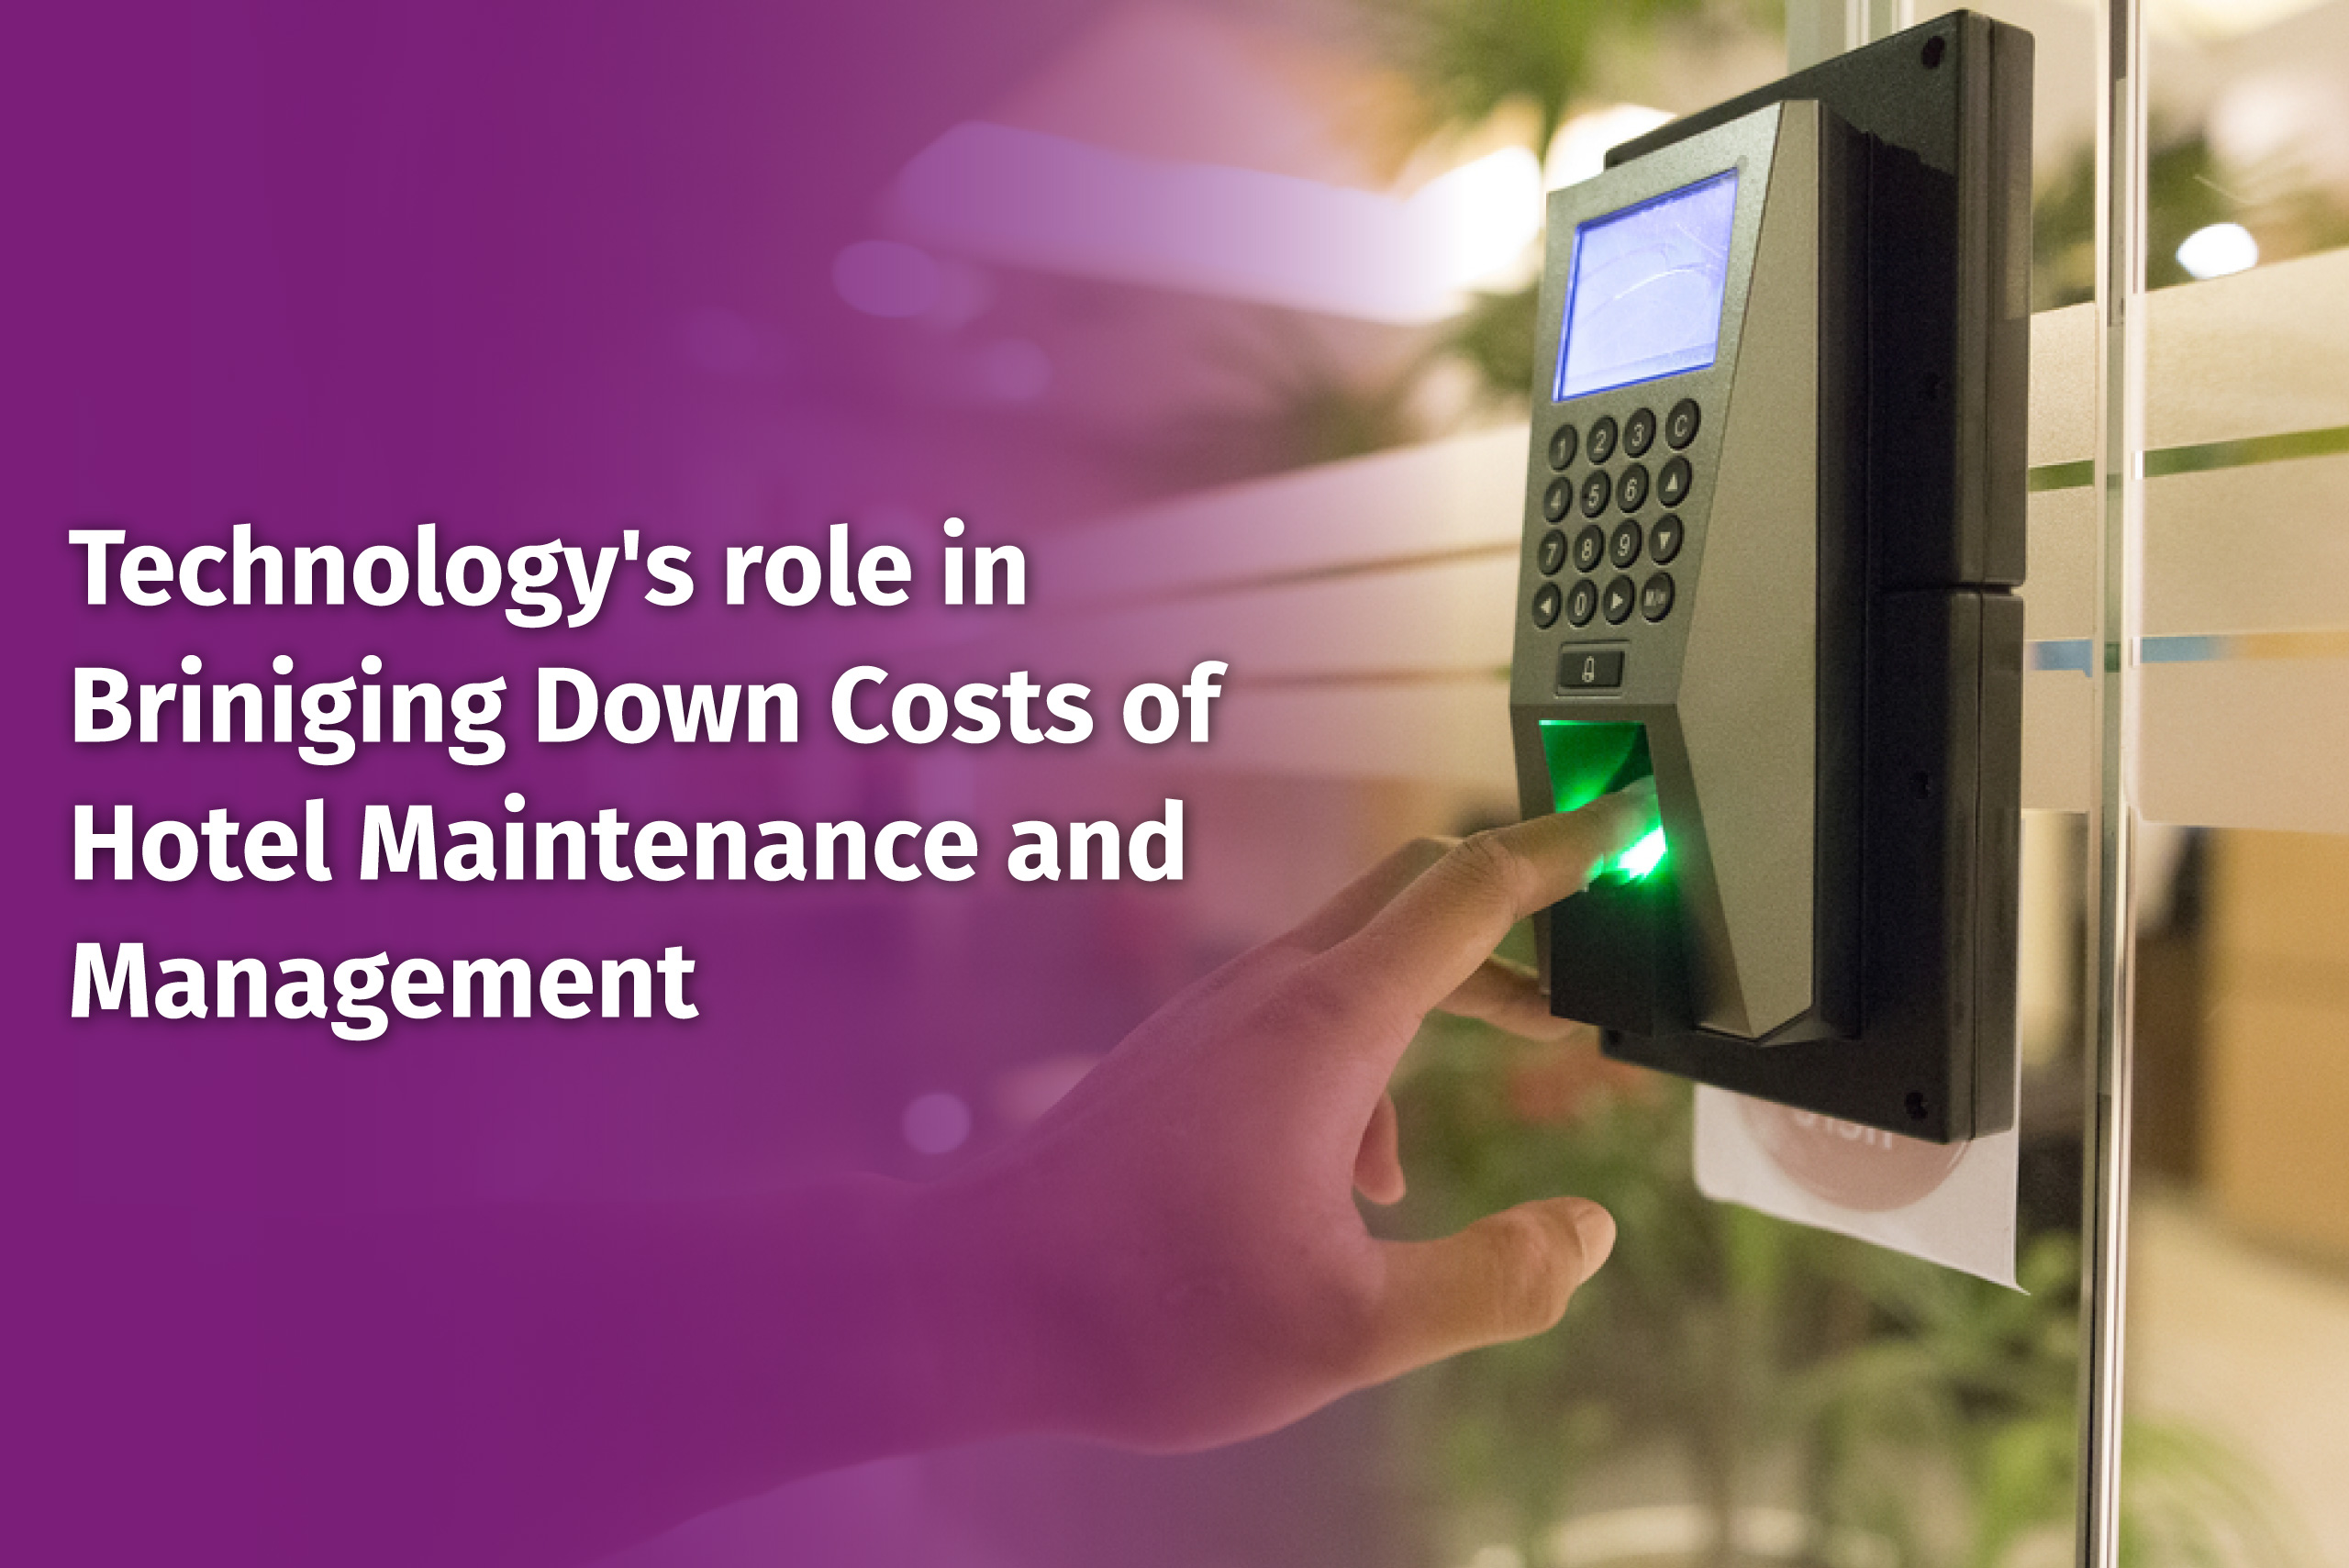 Technology's-role-in-Briniging-Down-Costs-of-Hotel-Maintenance